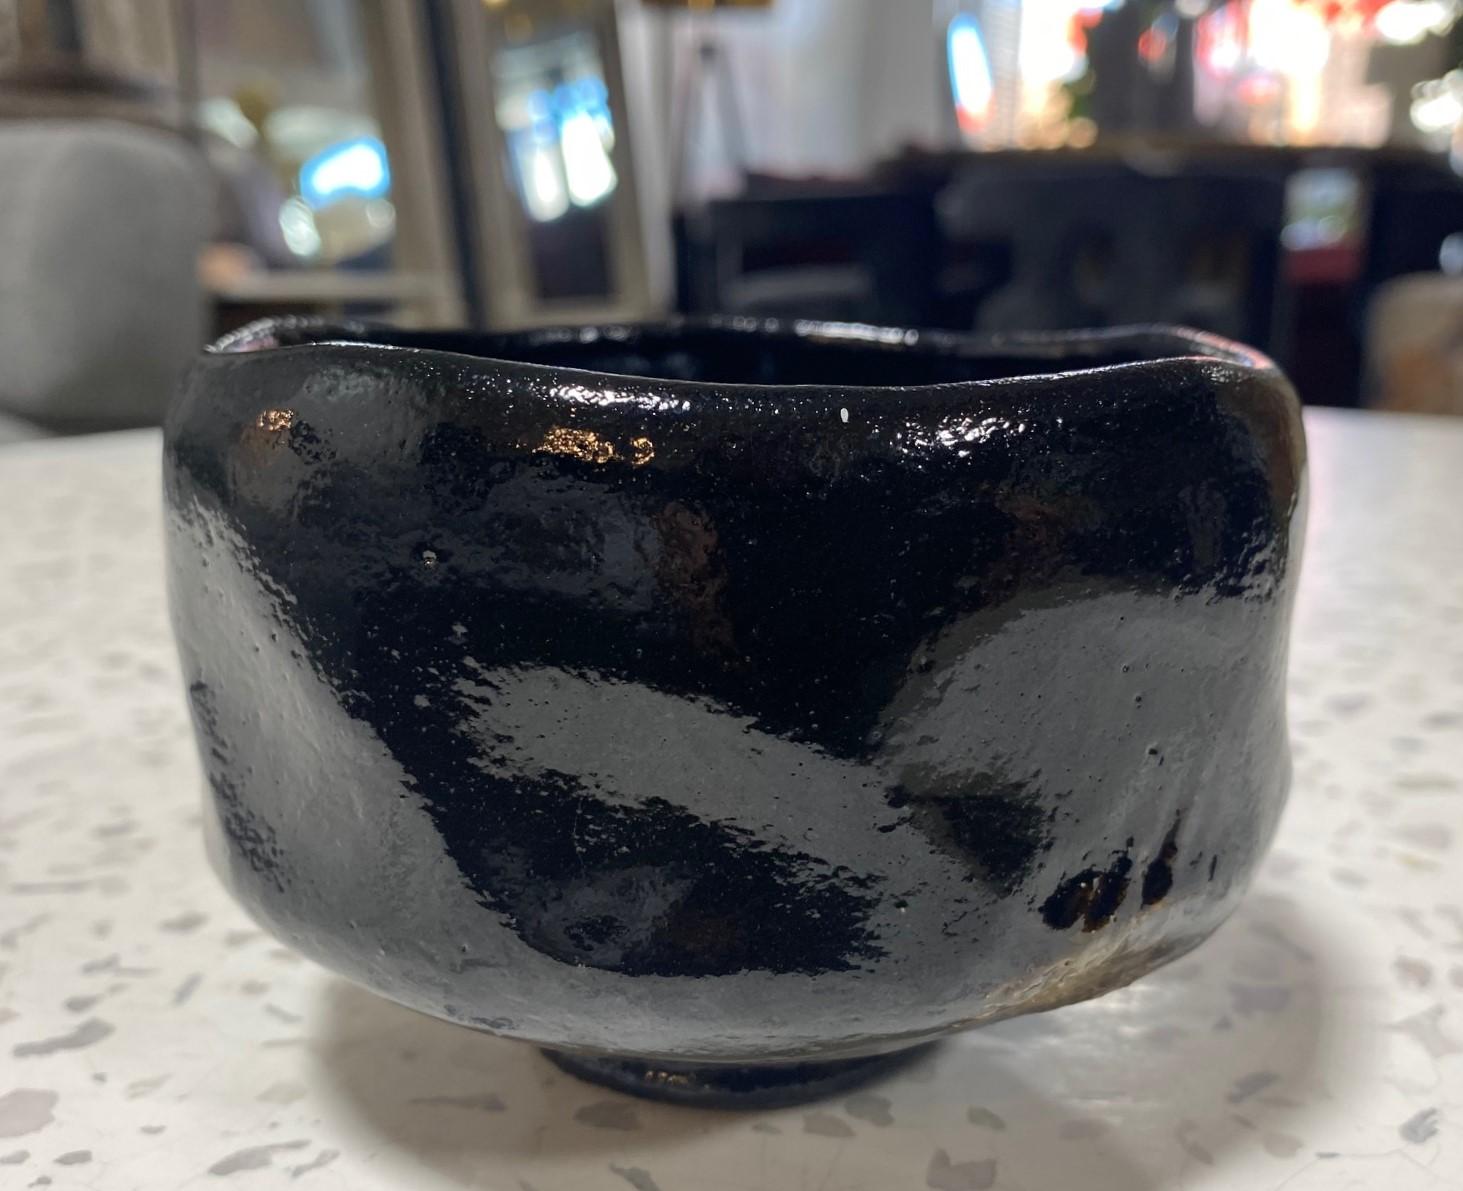 A wonderful Raku-fired pottery Chawan tea bowl by a renowned Japanese pottery master and one of Kyoto’s most prominent and best-known Raku-yaki potters Sasaki Shoraku III (1944- ). The work features a beautifully contoured body and dark rich glaze.